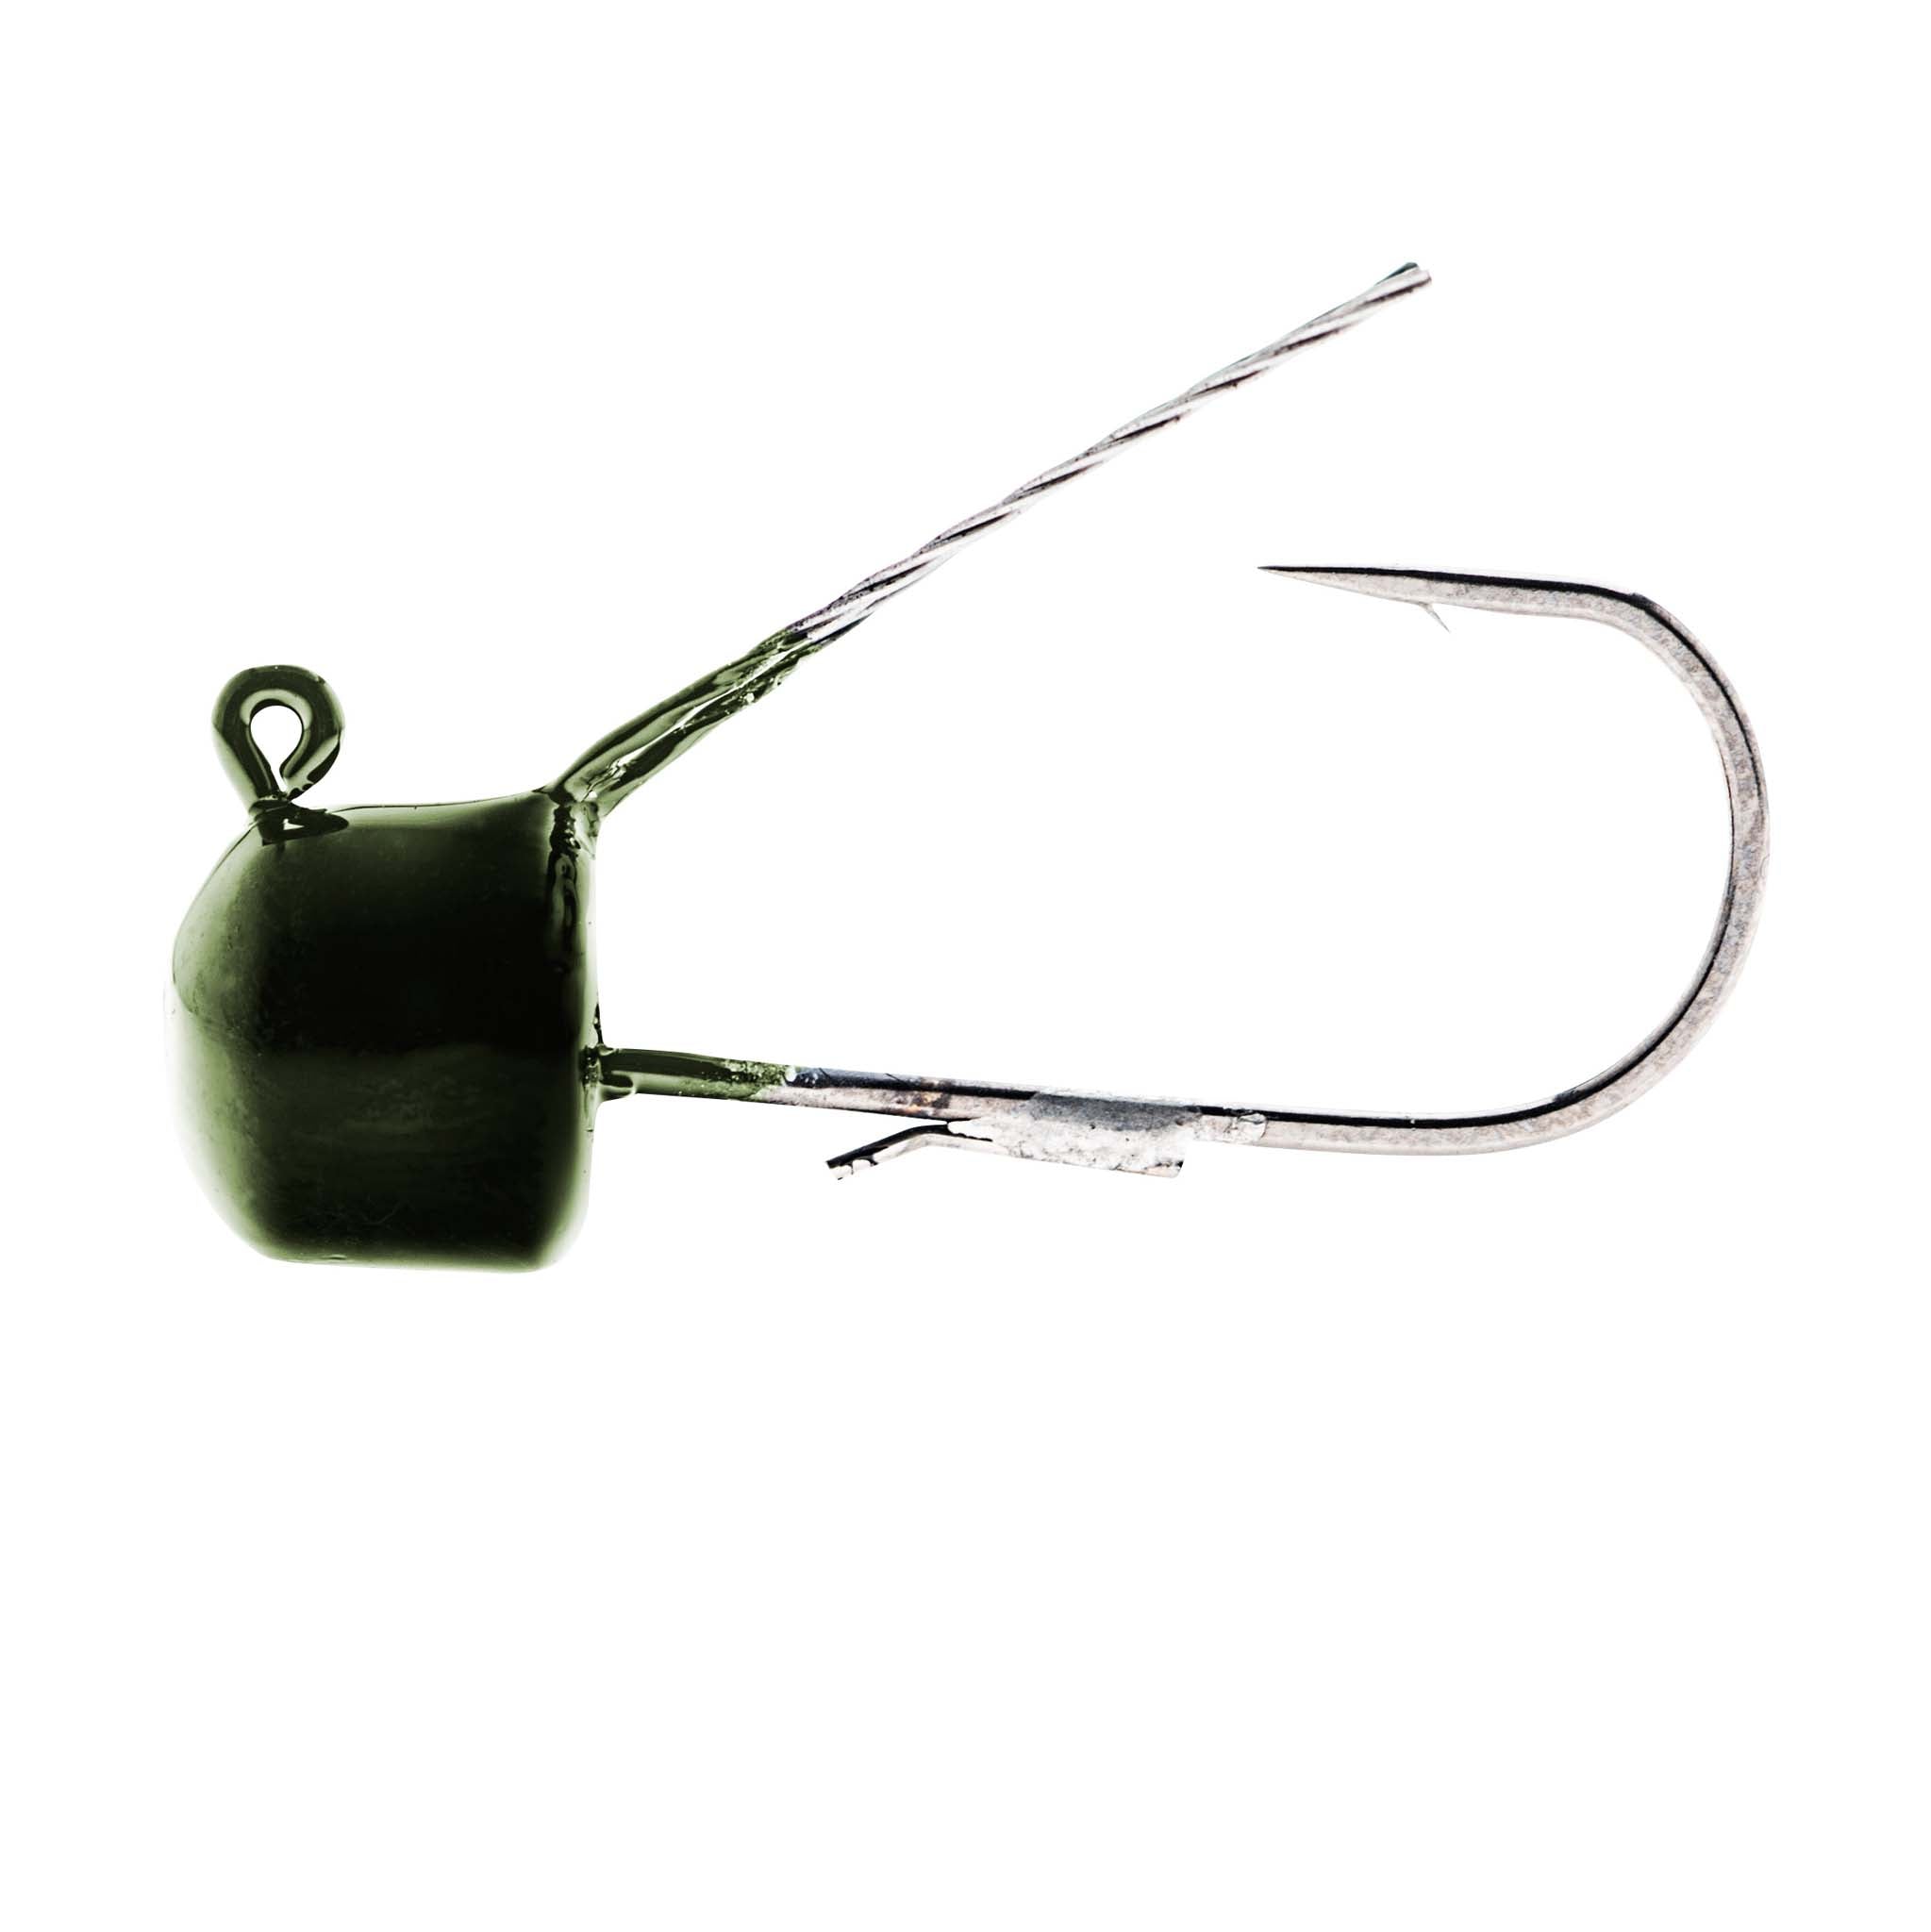 Offset Weedless NED mushroom jig heads with VMC Extra Wide Gap